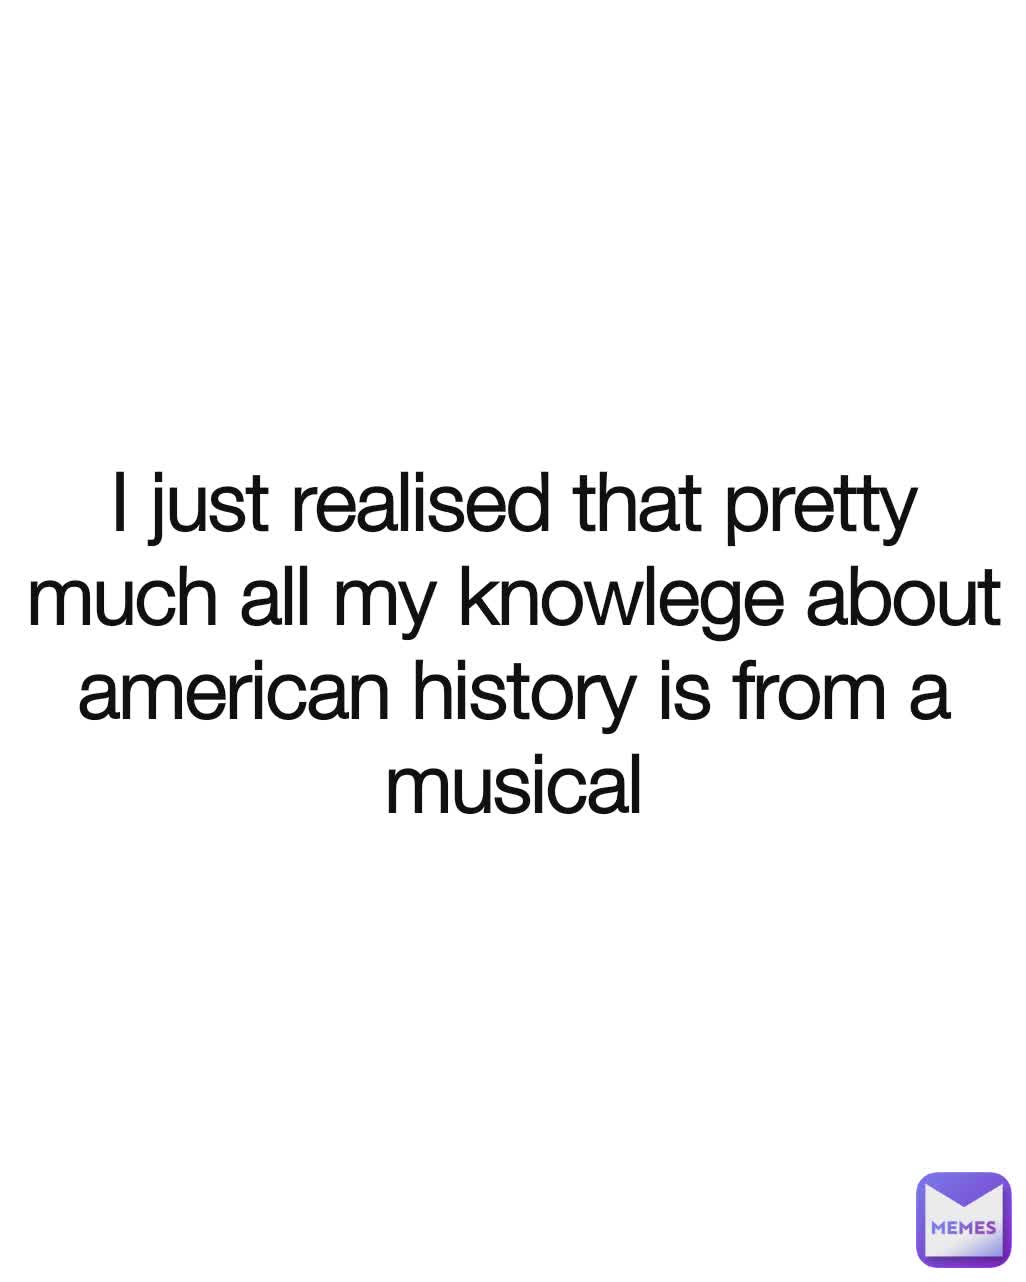 I just realised that pretty much all my knowlege about american history is from a musical